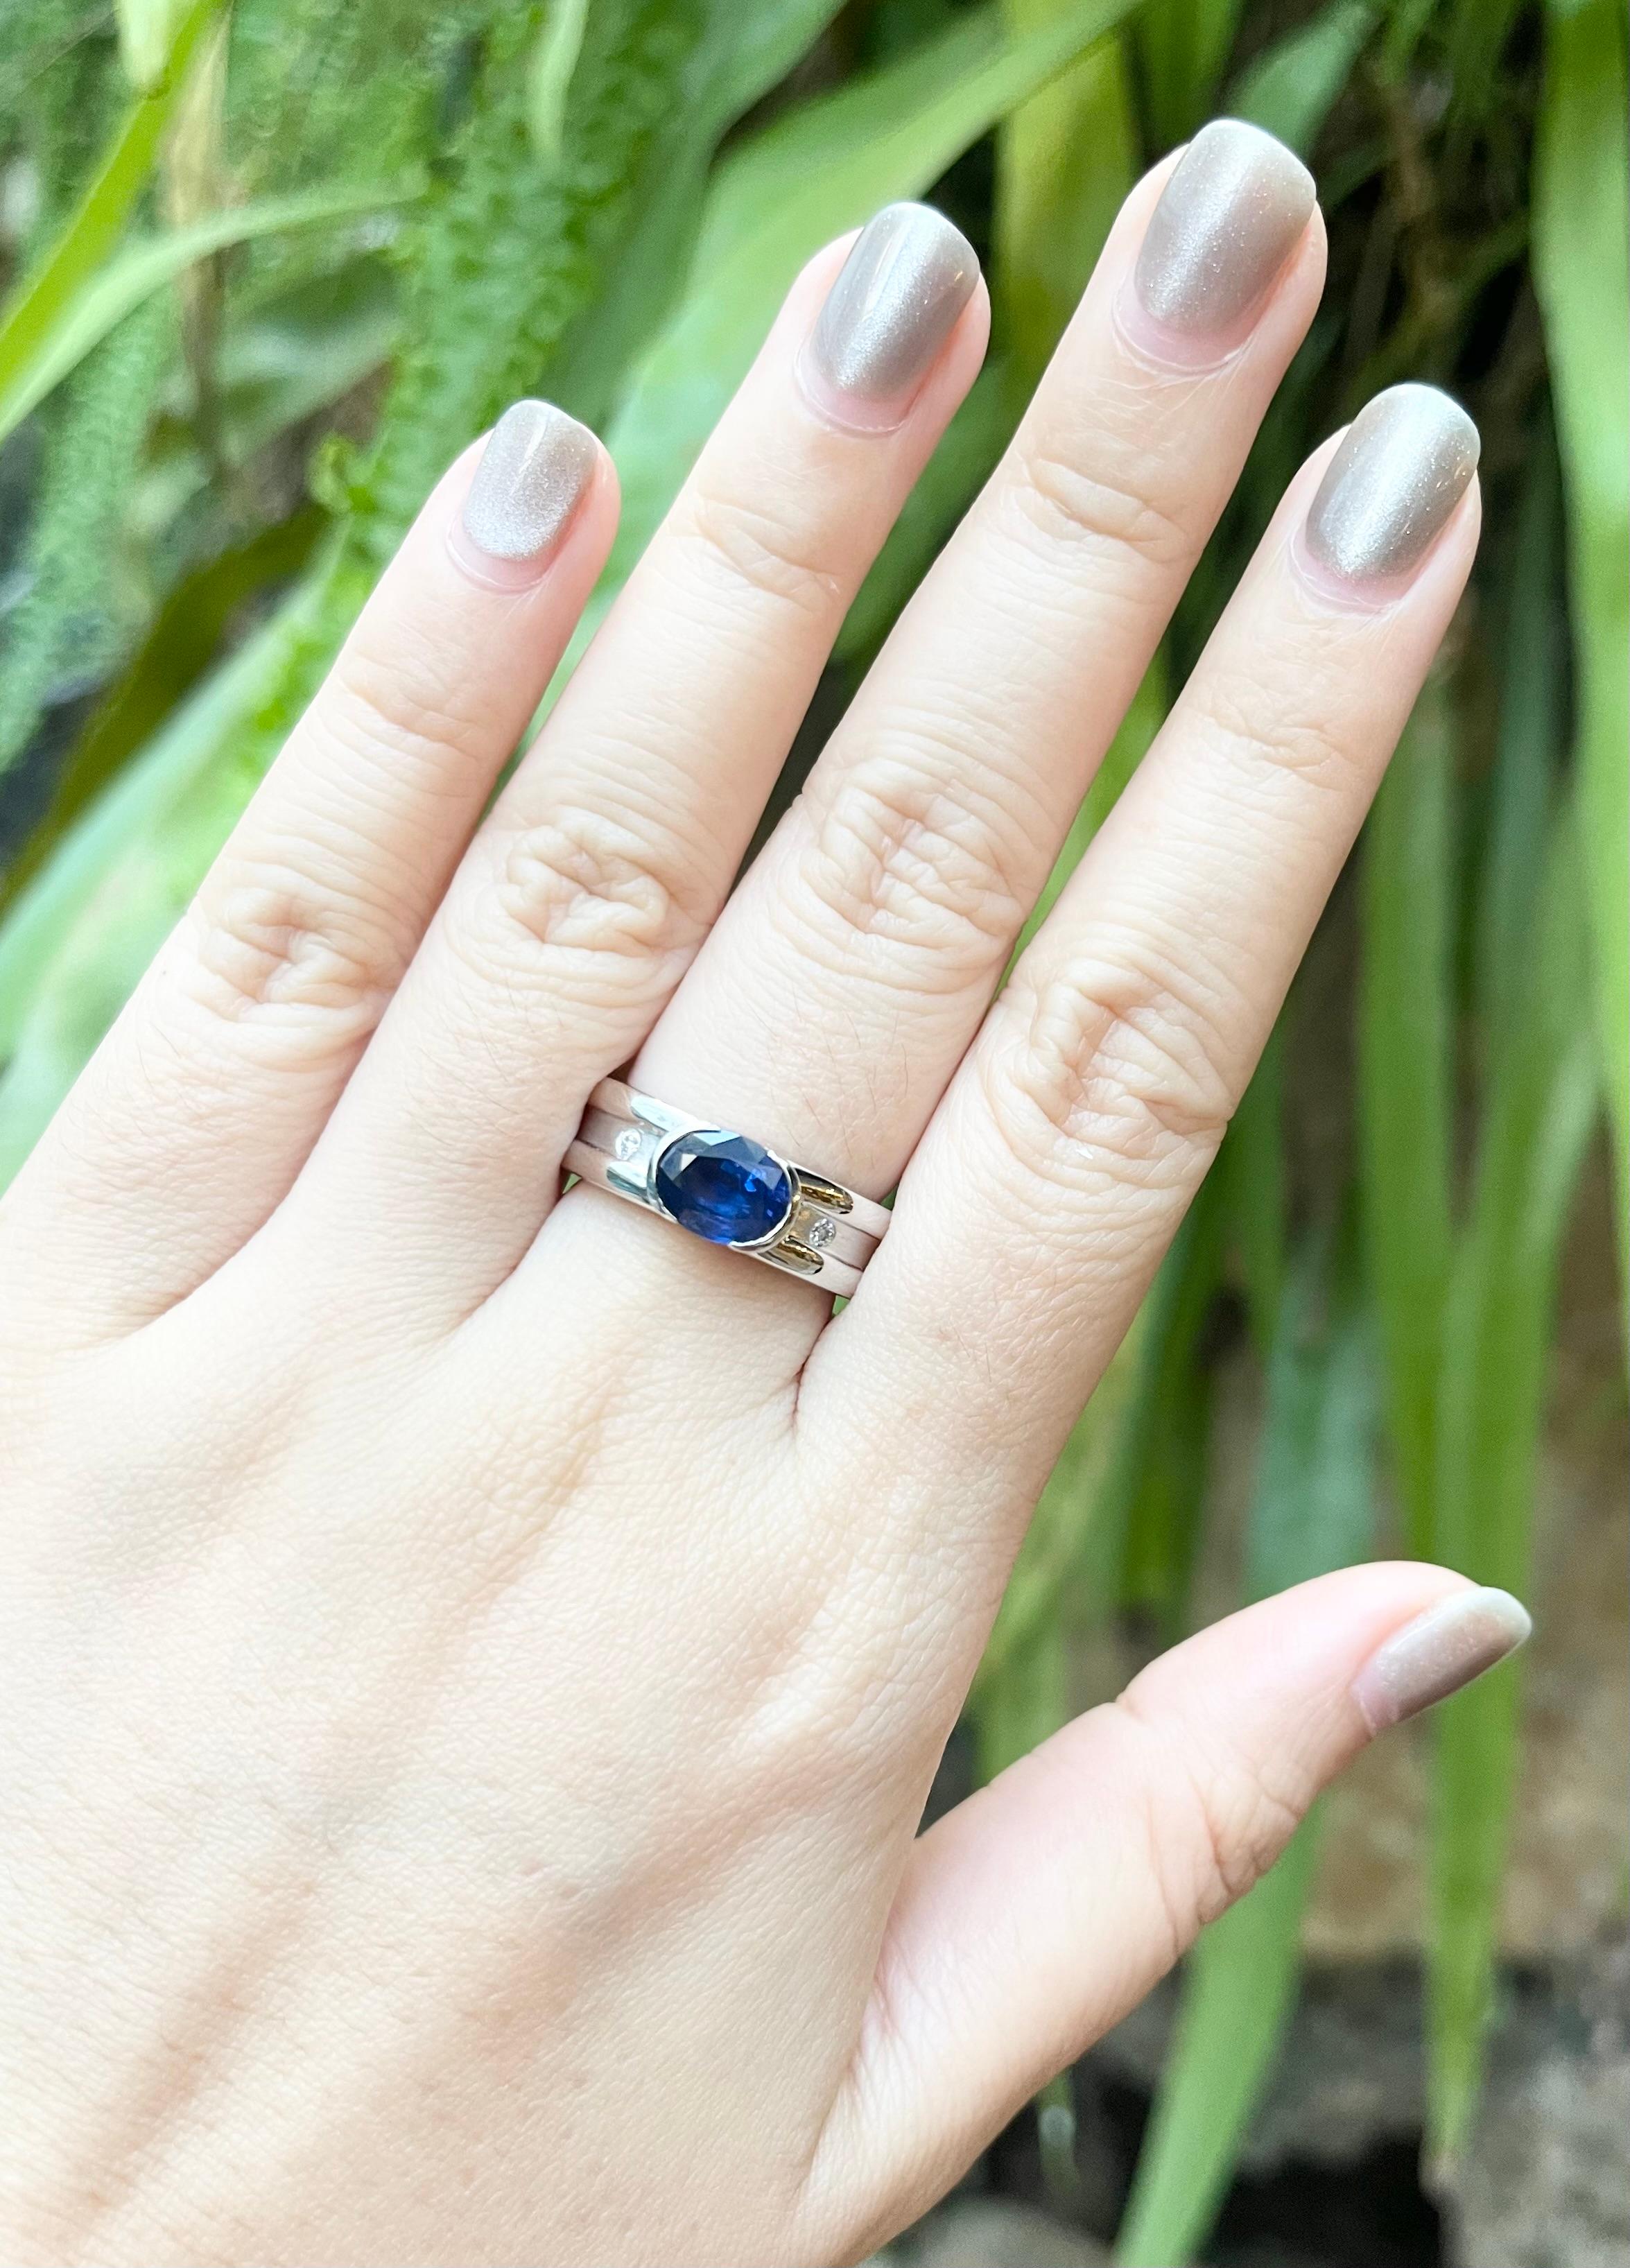 Blue Sapphire 2.49 carats with Diamond 0.05 carat Ring set in Platinum 950 Settings

Width:  1.0 cm 
Length: 0.7 cm
Ring Size: 58
Total Weight: 24.13 grams

